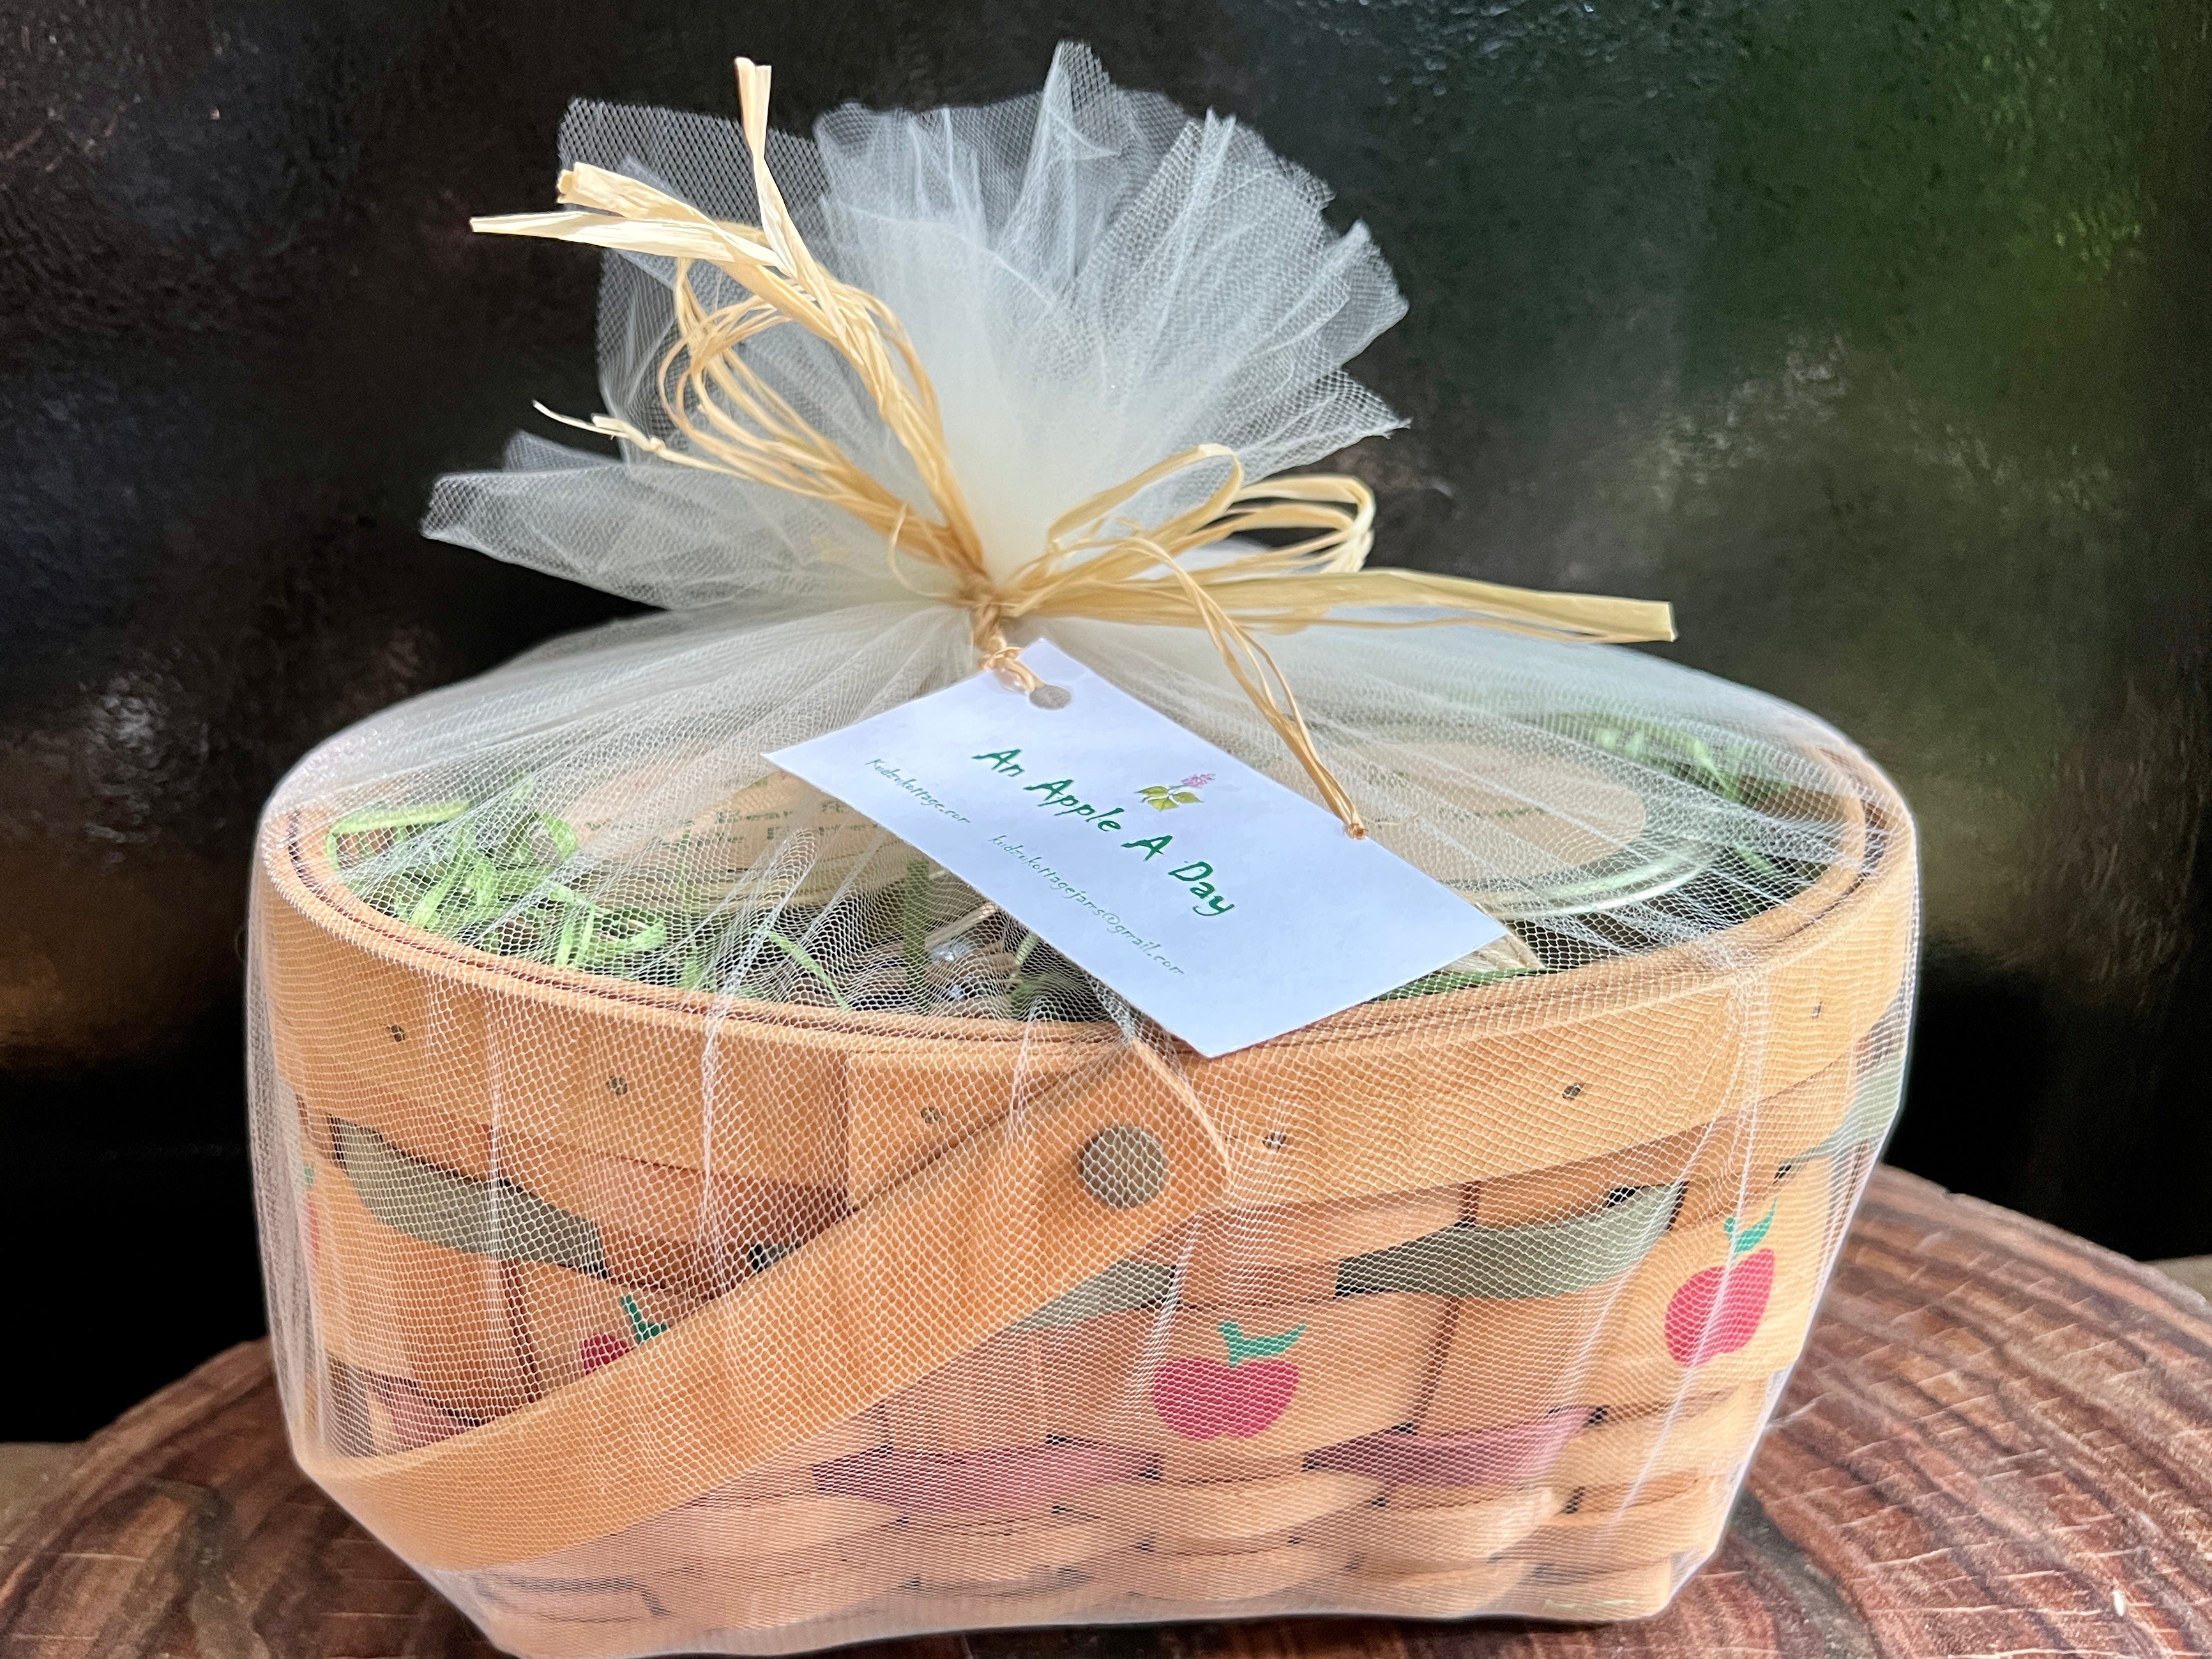 An Apple A Day Gift Basket